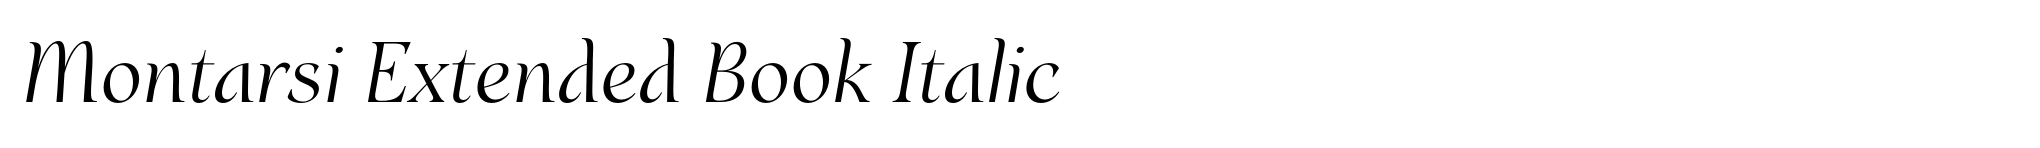 Montarsi Extended Book Italic image